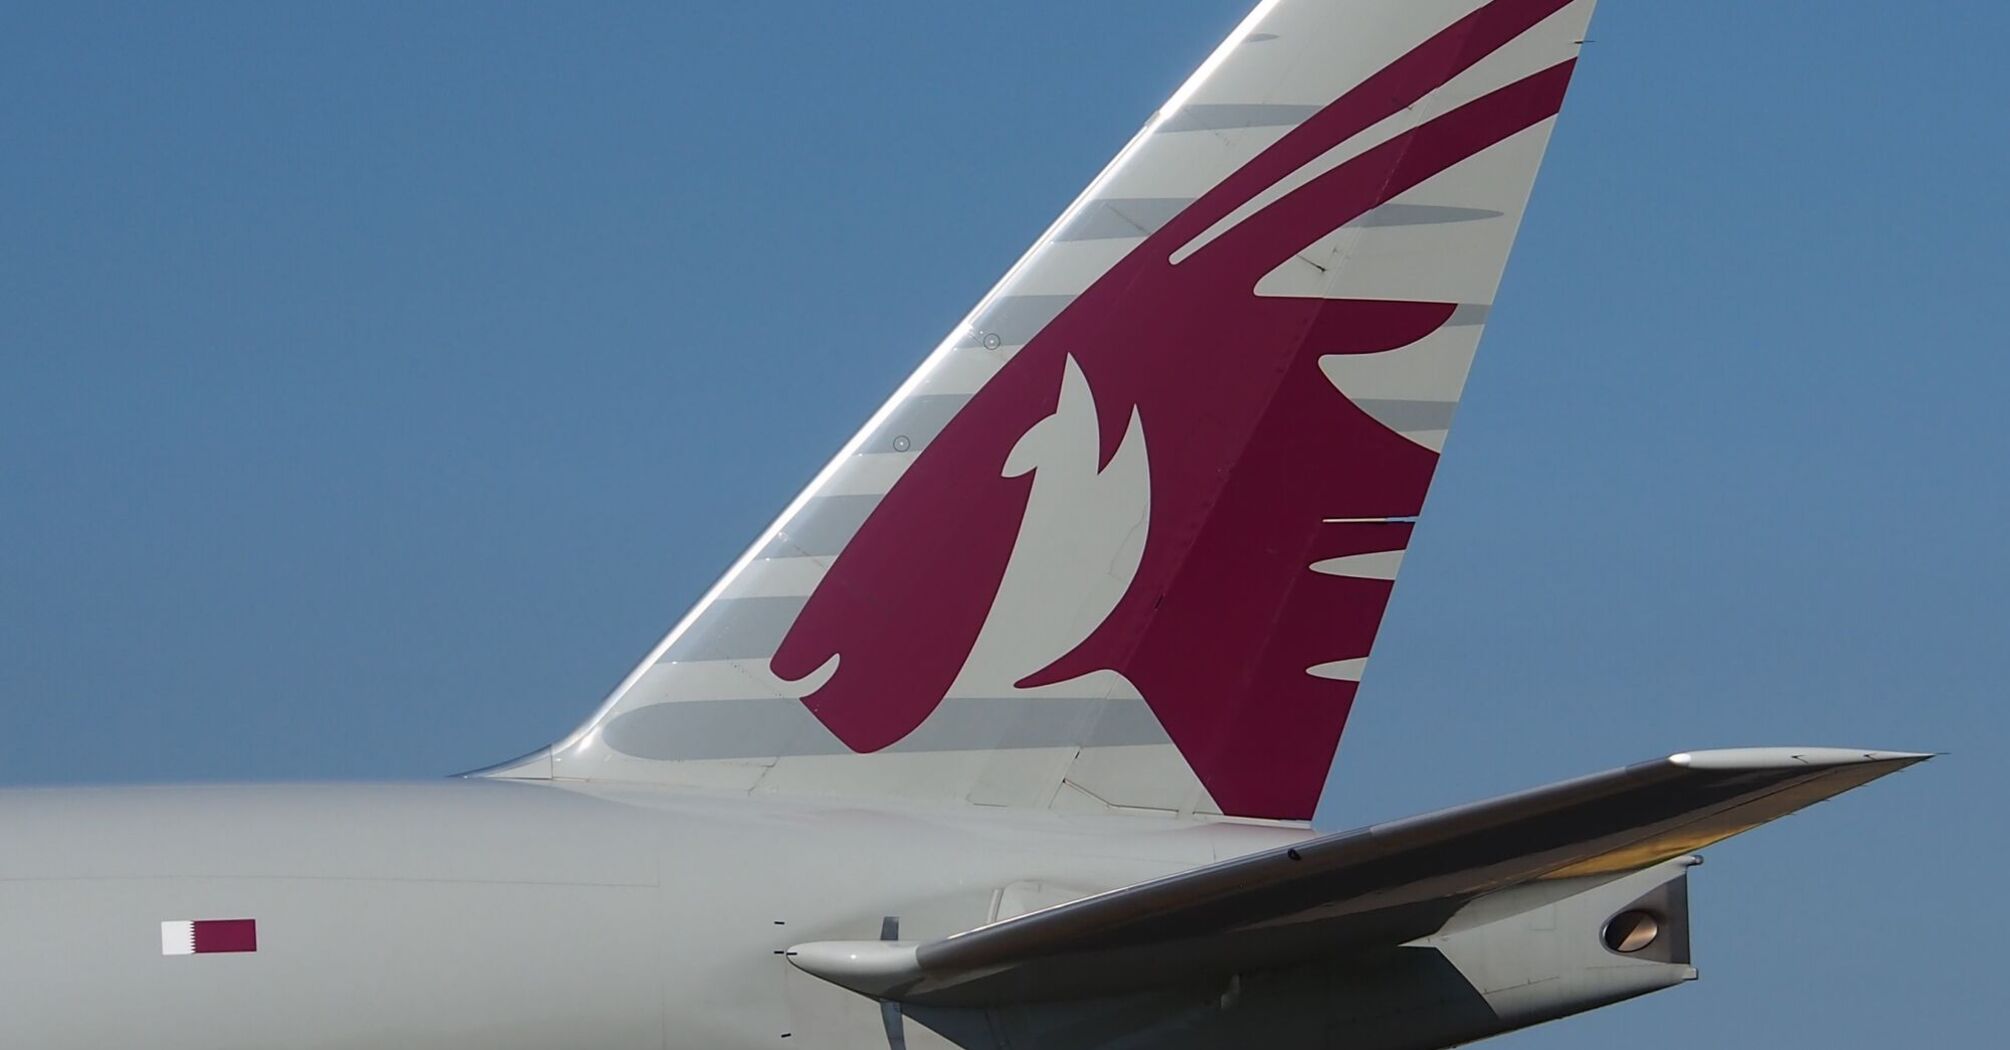 Close-up view of the tail fin of a Qatar Airways aircraft displaying the company logo